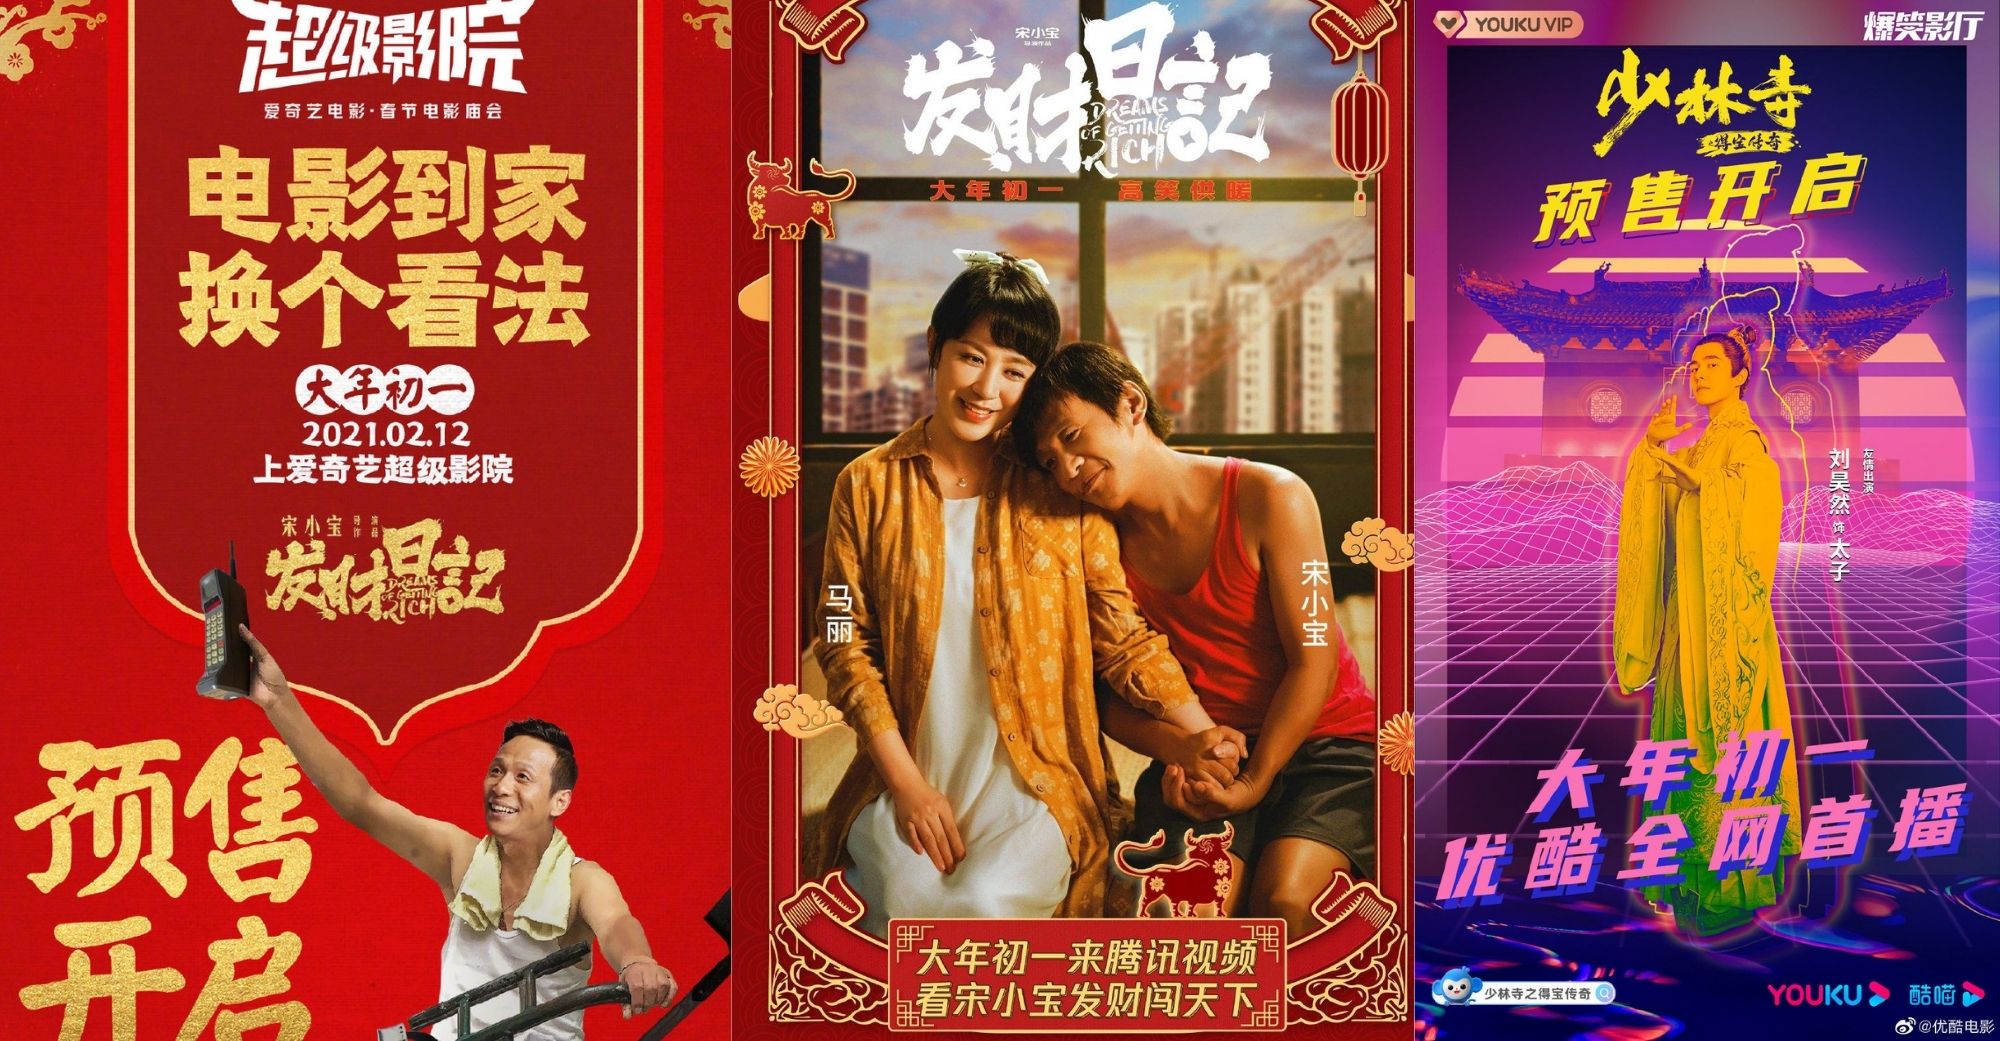 Top Three Video Streaming Giants Co-Host First Virtual Cinema Project in China Amid Spring Festival